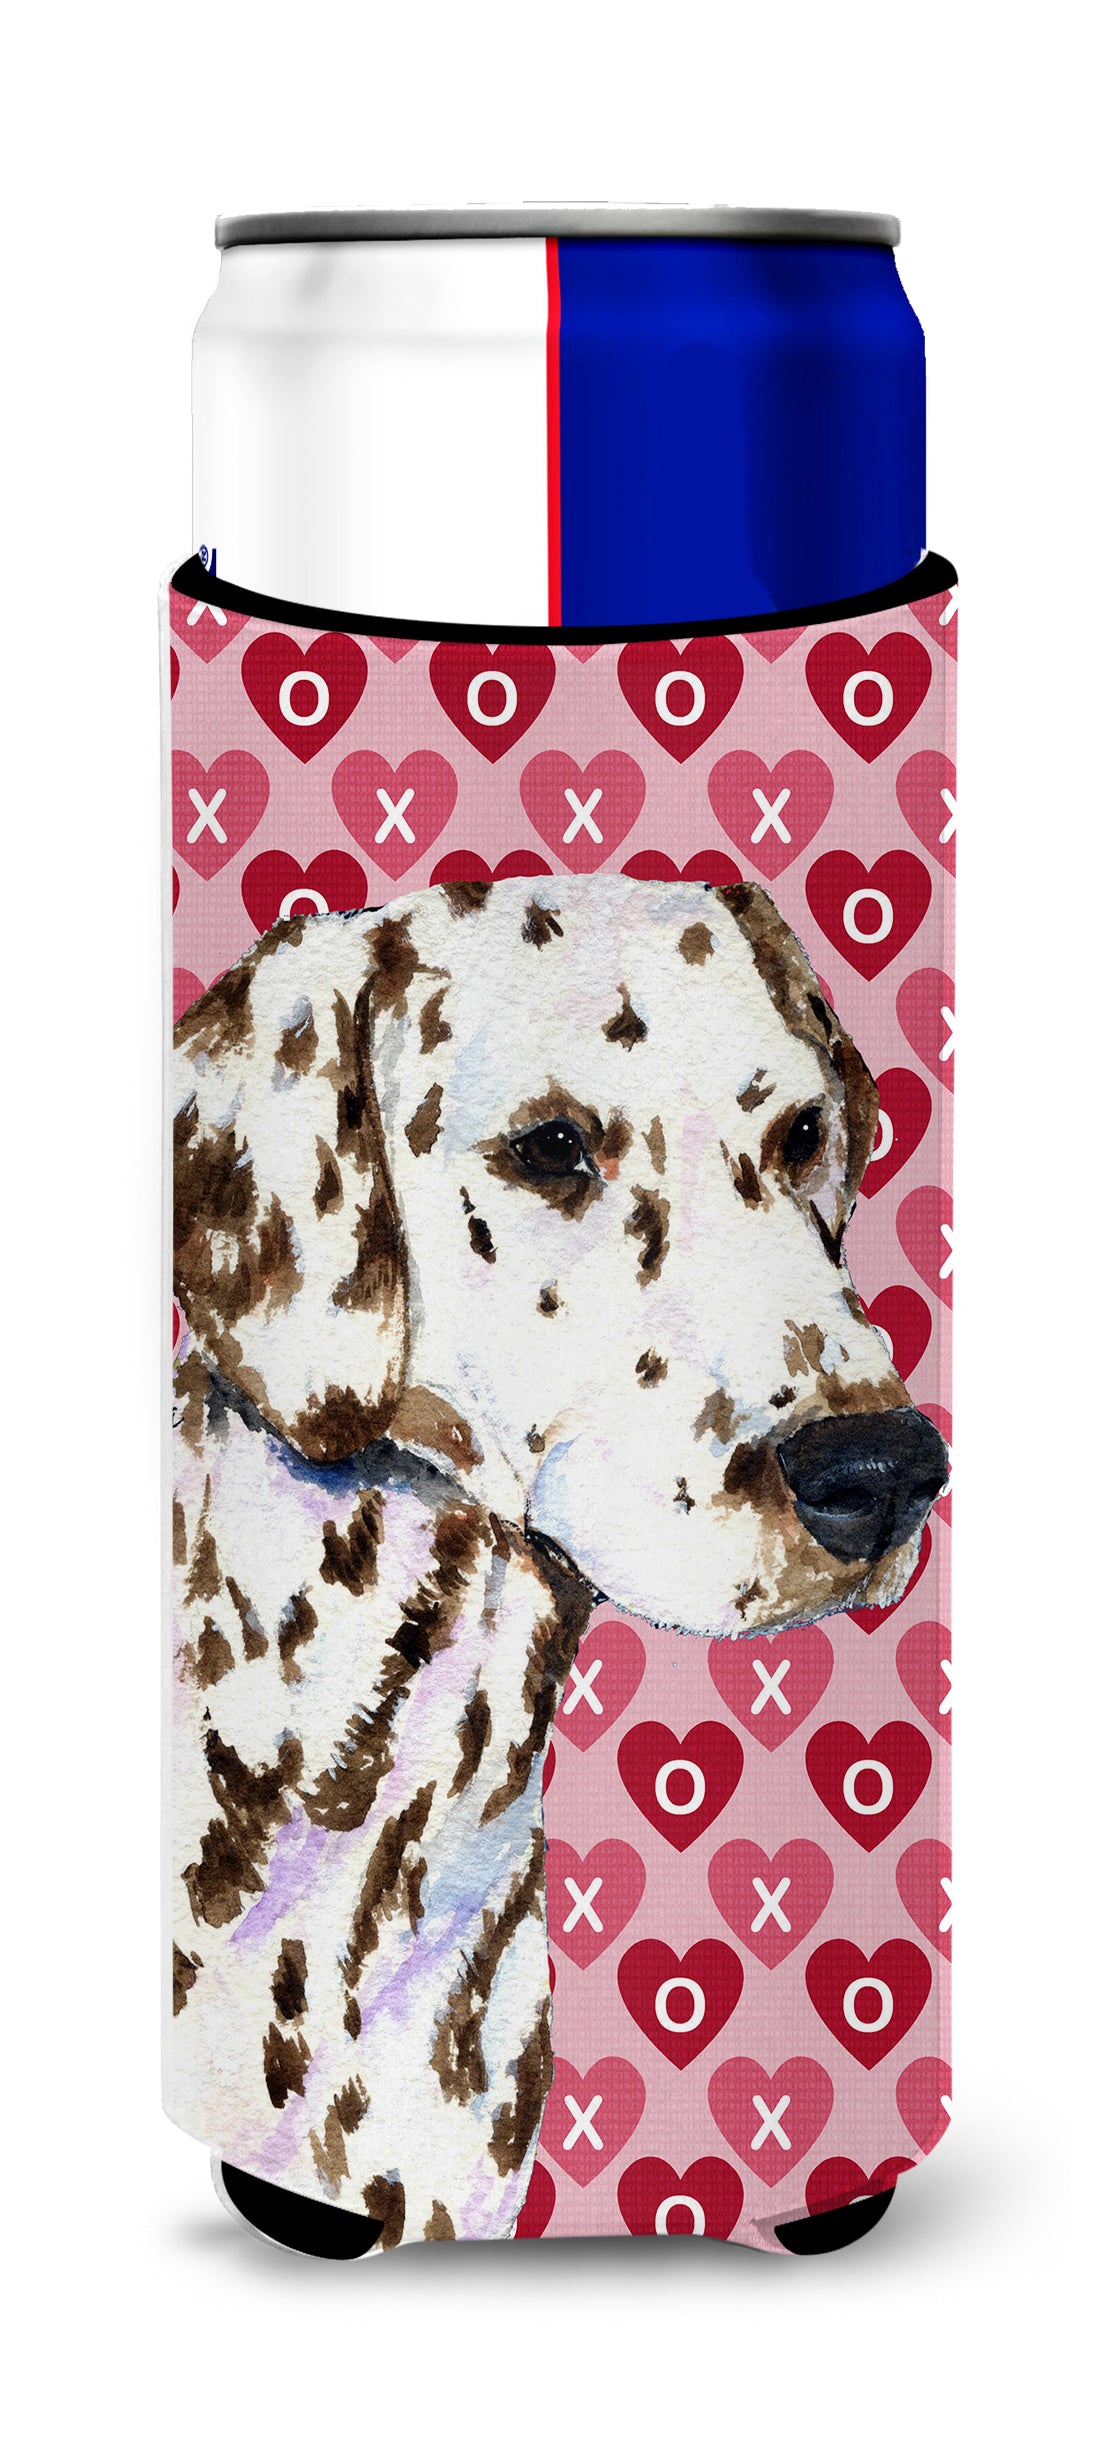 Dalmatian Hearts Love and Valentine's Day Portrait Ultra Beverage Insulators for slim cans SS4469MUK.